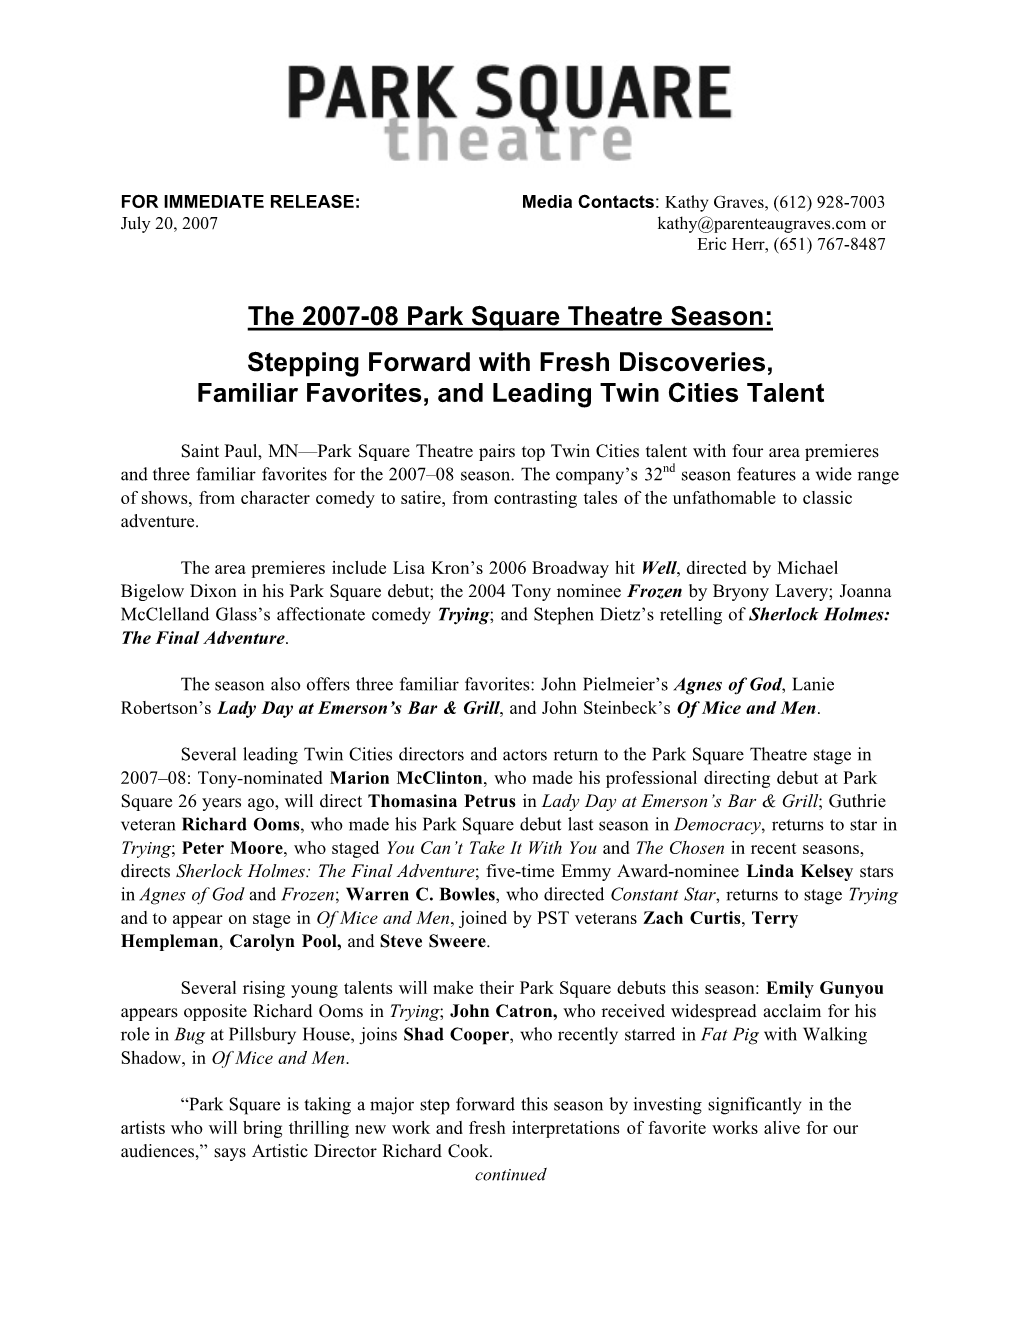 The 2007-08 Park Square Theatre Season: Stepping Forward with Fresh Discoveries, Familiar Favorites, and Leading Twin Cities Talent